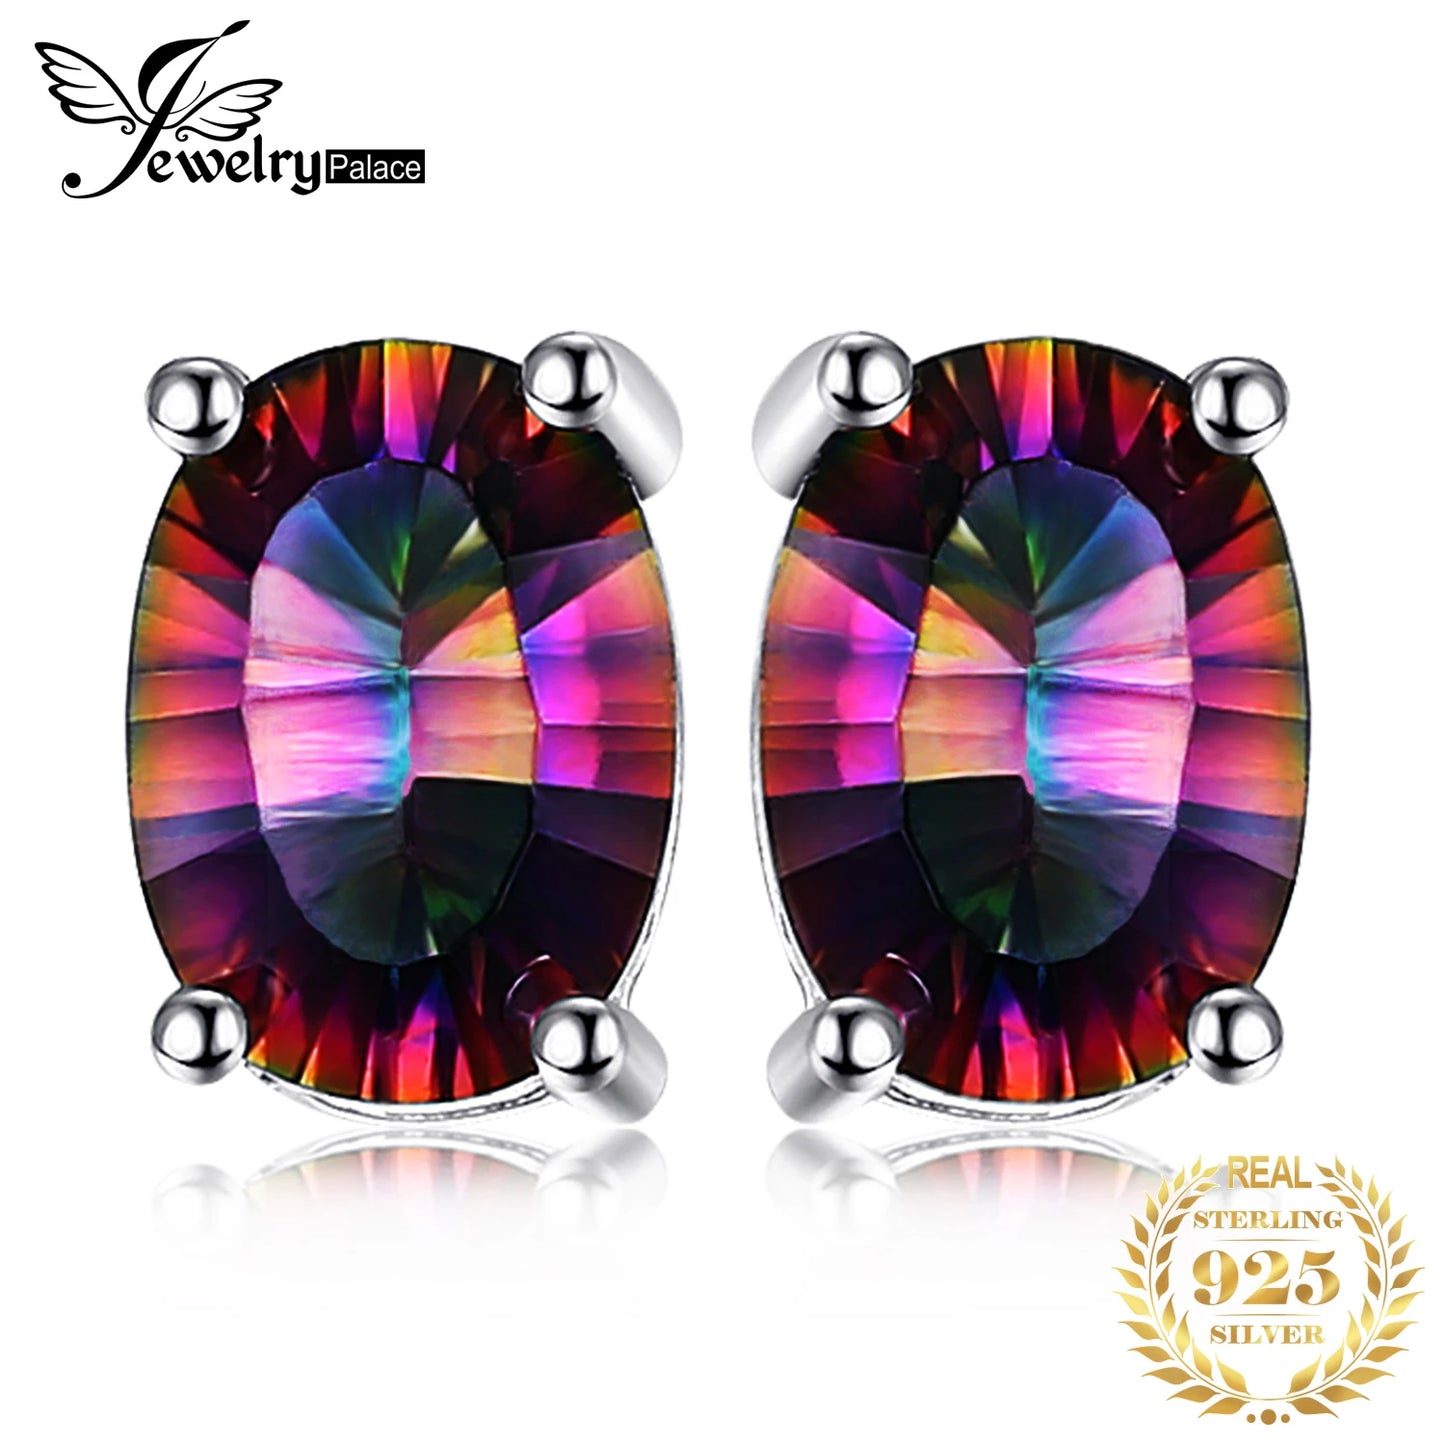 JewelryPalace Oval Rainbow Fire Mystic Quartz Solid 925 Sterling Silver Stud Earrings Women Fashion Statement Gemstone Jewelry CHINA